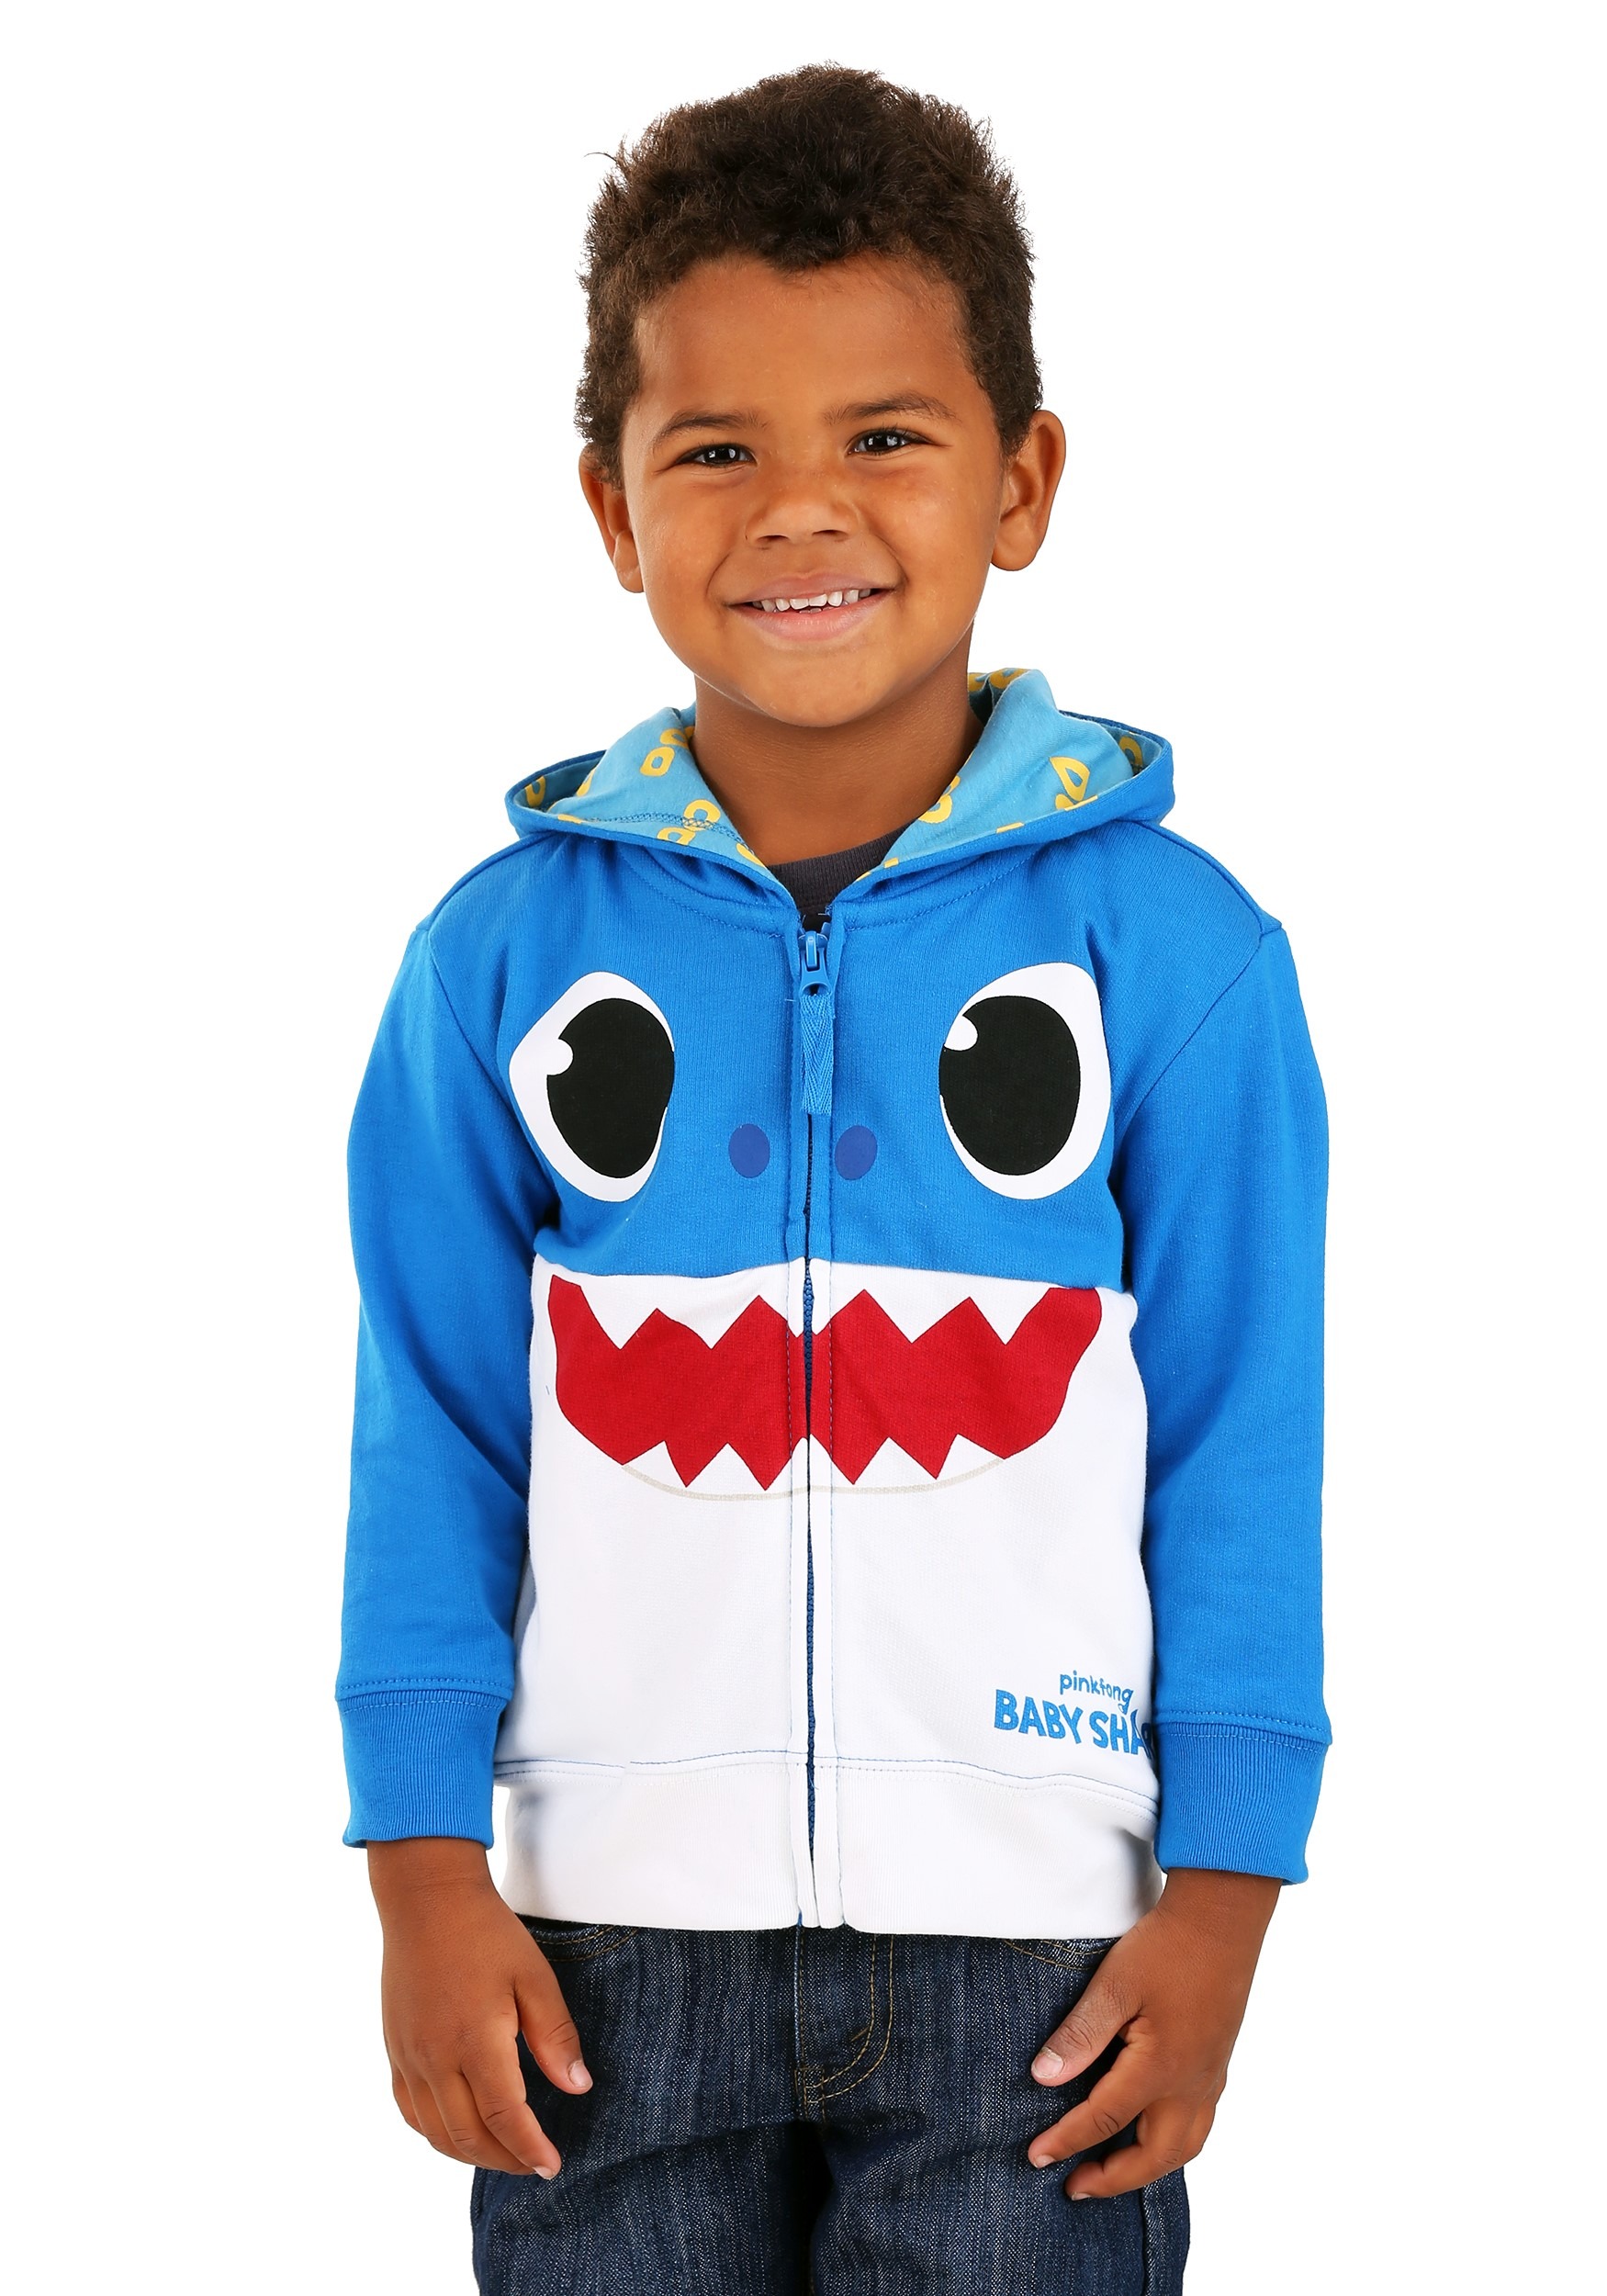 https://images.fun.com/products/68799/1-1/toddler-blue-baby-shark-costume-hoodie.jpg